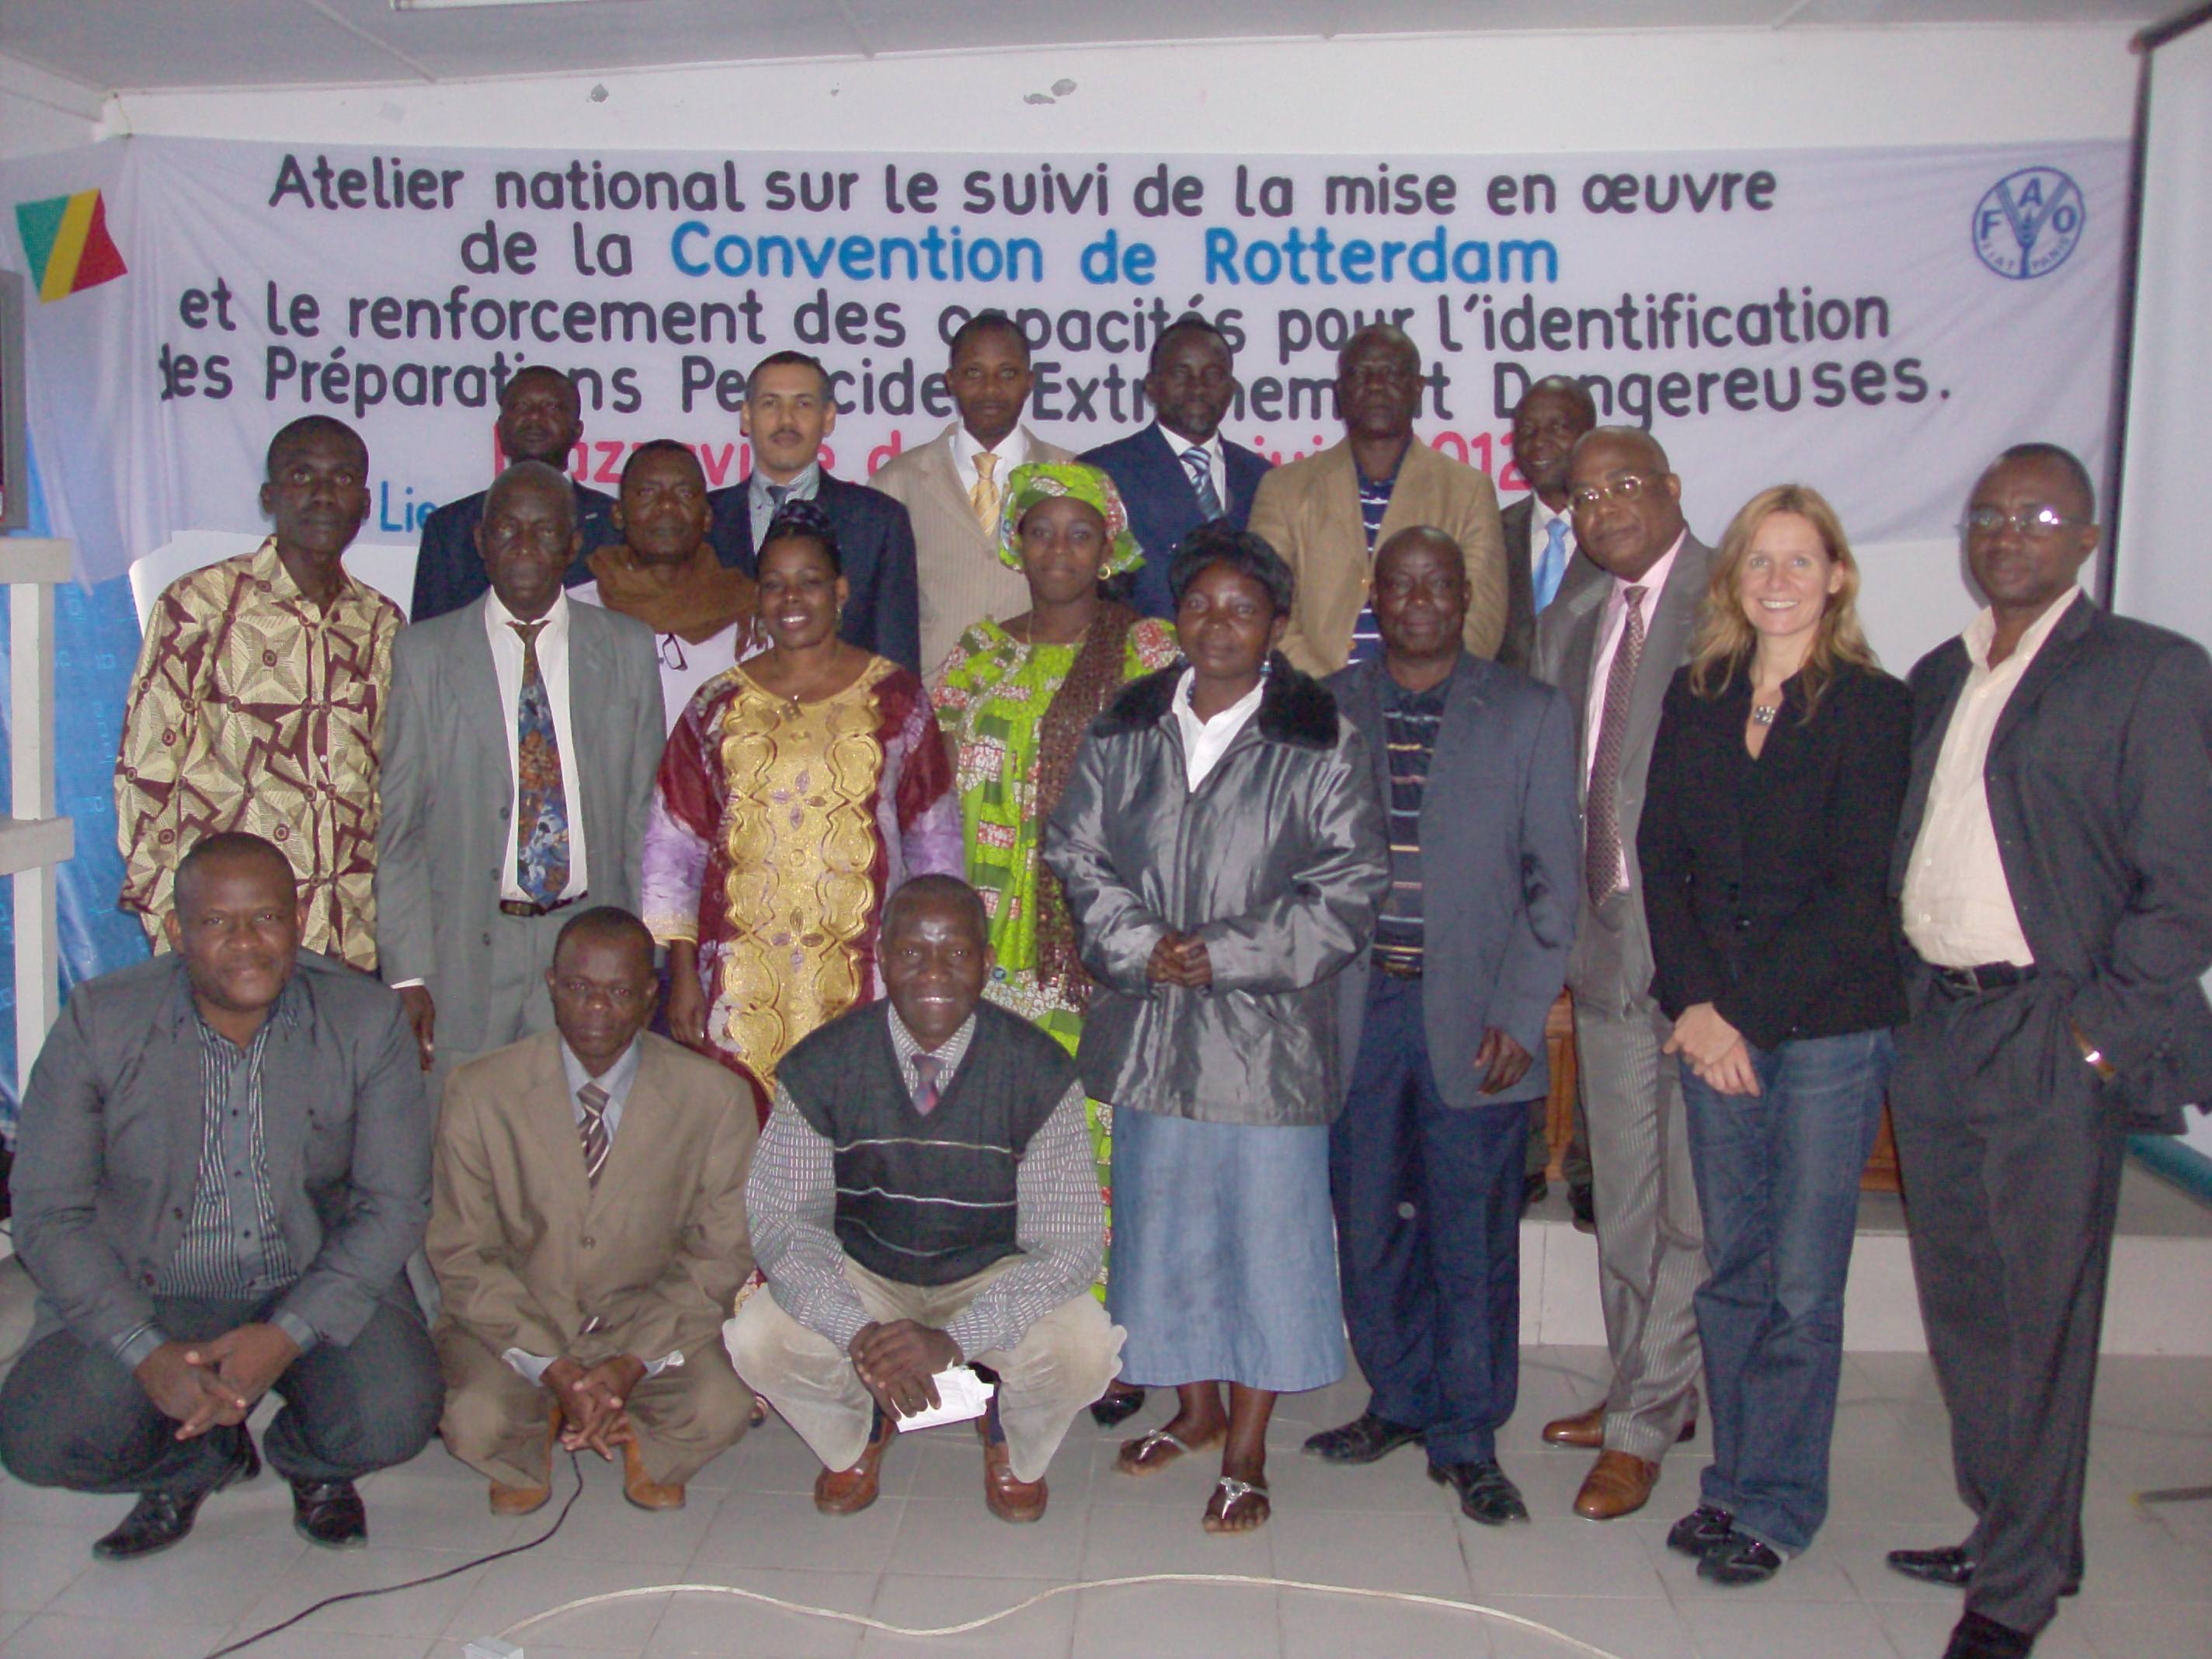 Republic of Congo, June 2012 : Rotterdam Convention works with stakeholders to address risks of Severely Hazardous Pesticides Formulations (SHPF)